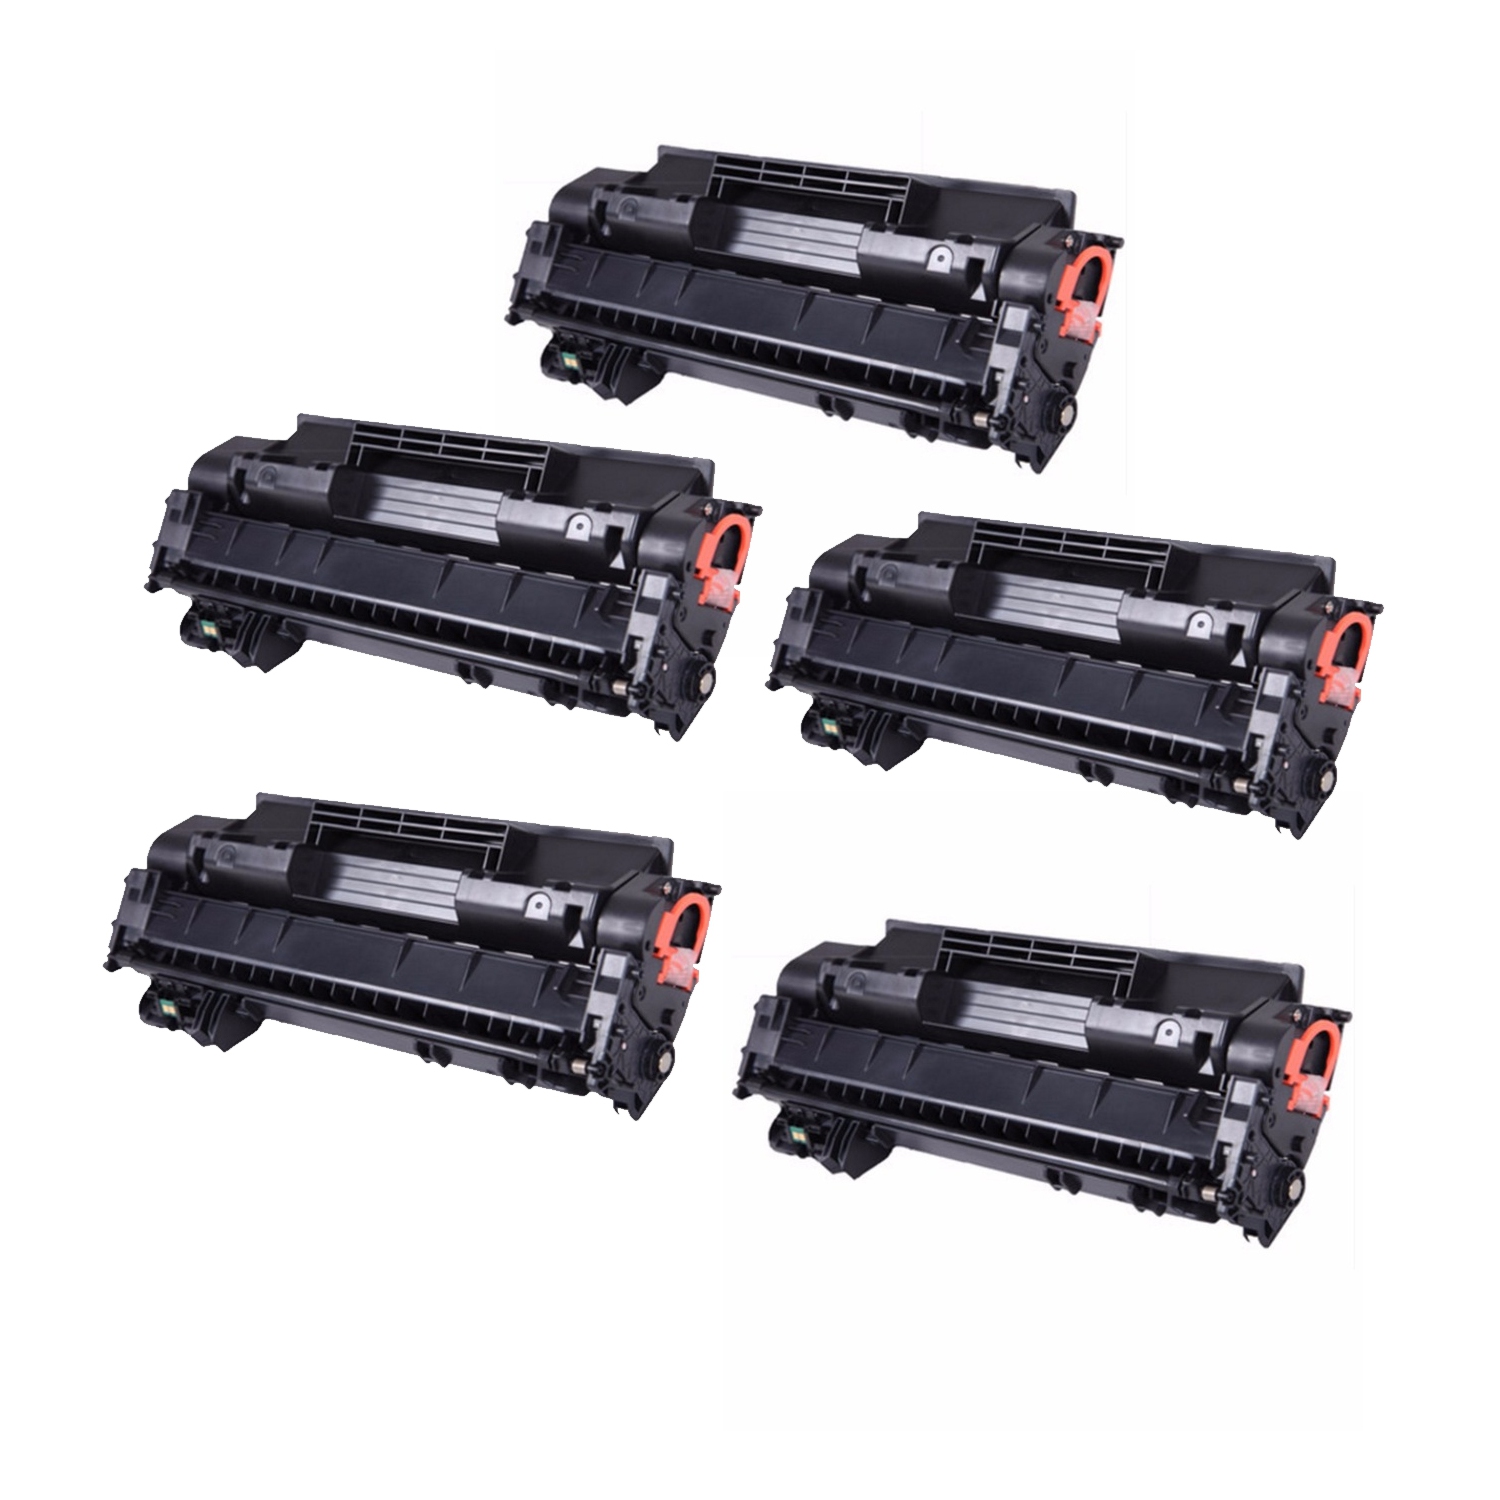 5Pack CRG119 Compatible Toner Cartridge for Canon 119 (3479B001) ImageClass LBP6300d, LBP6650dn,LBP6670dn,MF5850dn,MF5960dn, MF6160dw, MF6180dw